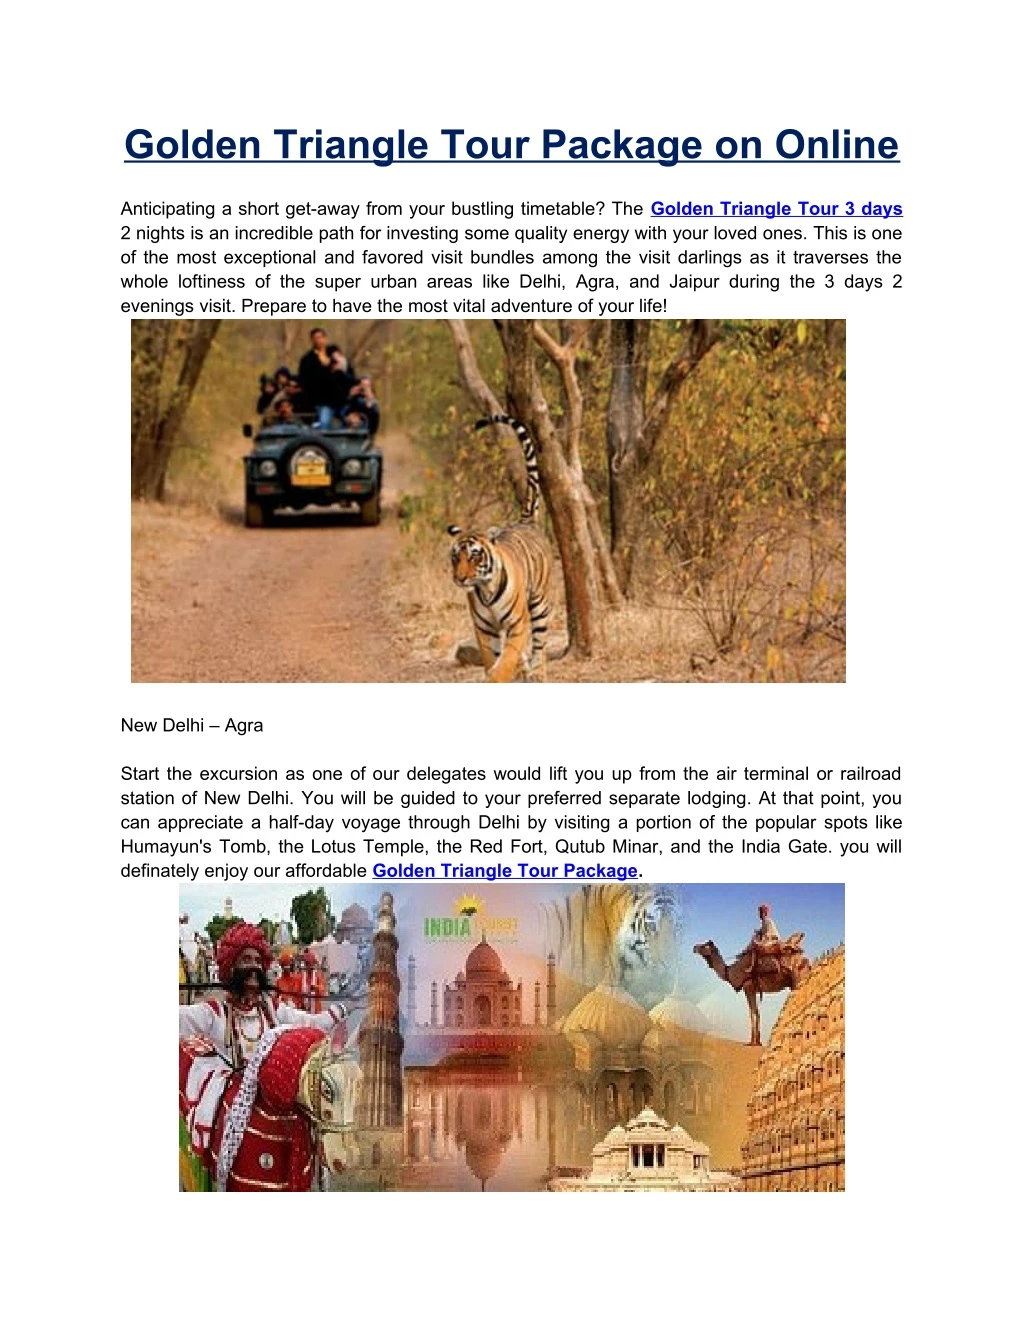 golden triangle tour package on online